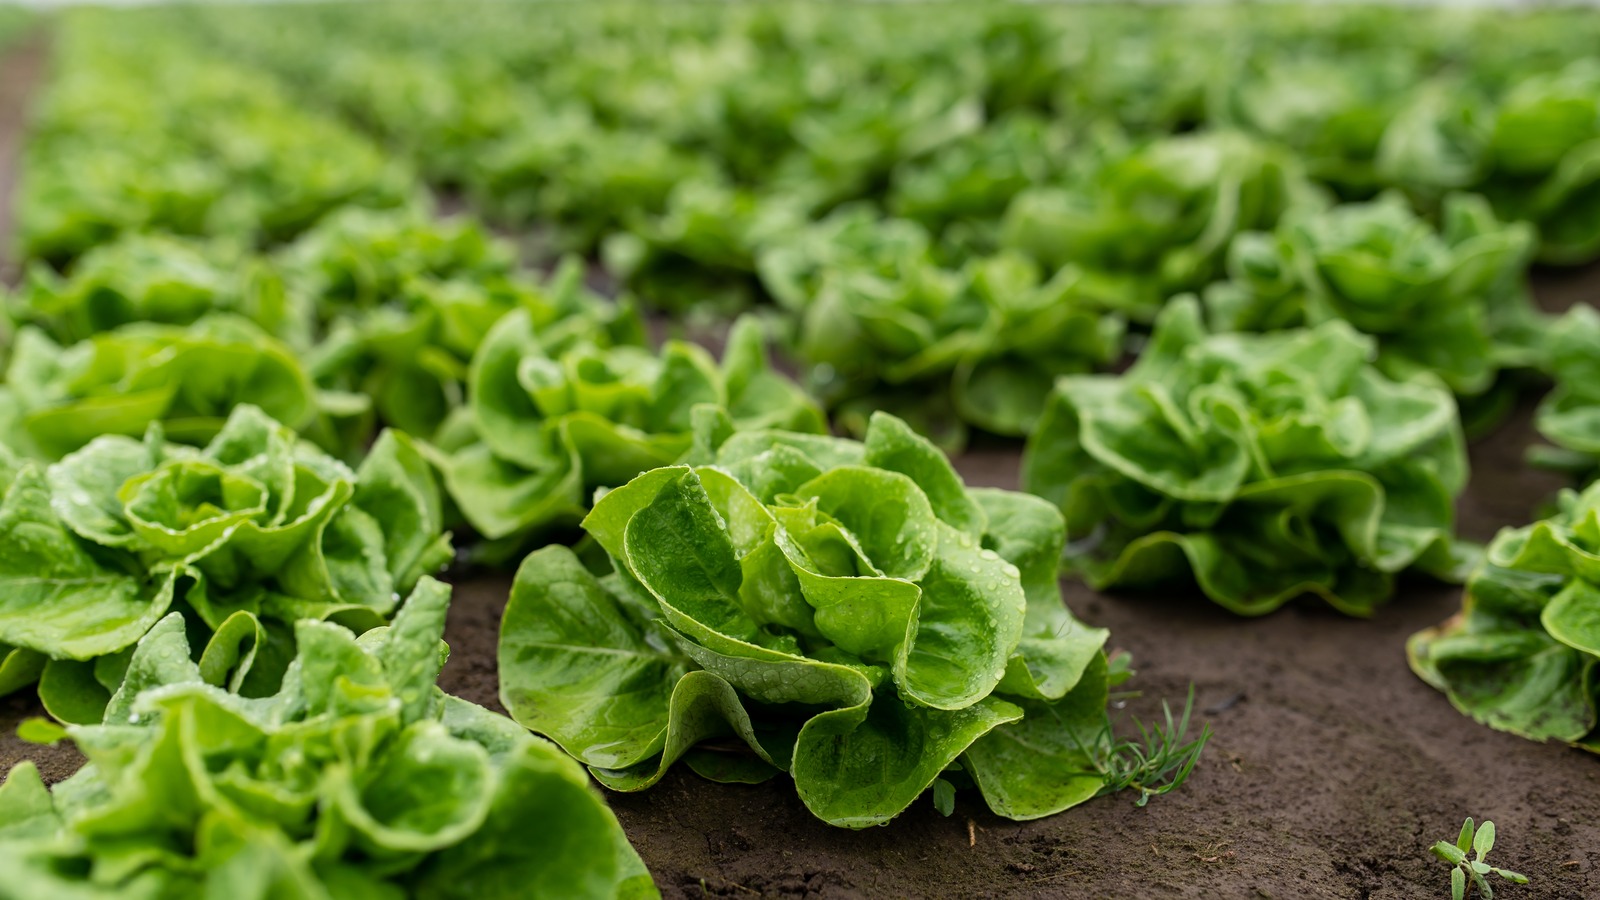 What We Know About The Impending Lettuce Shortage